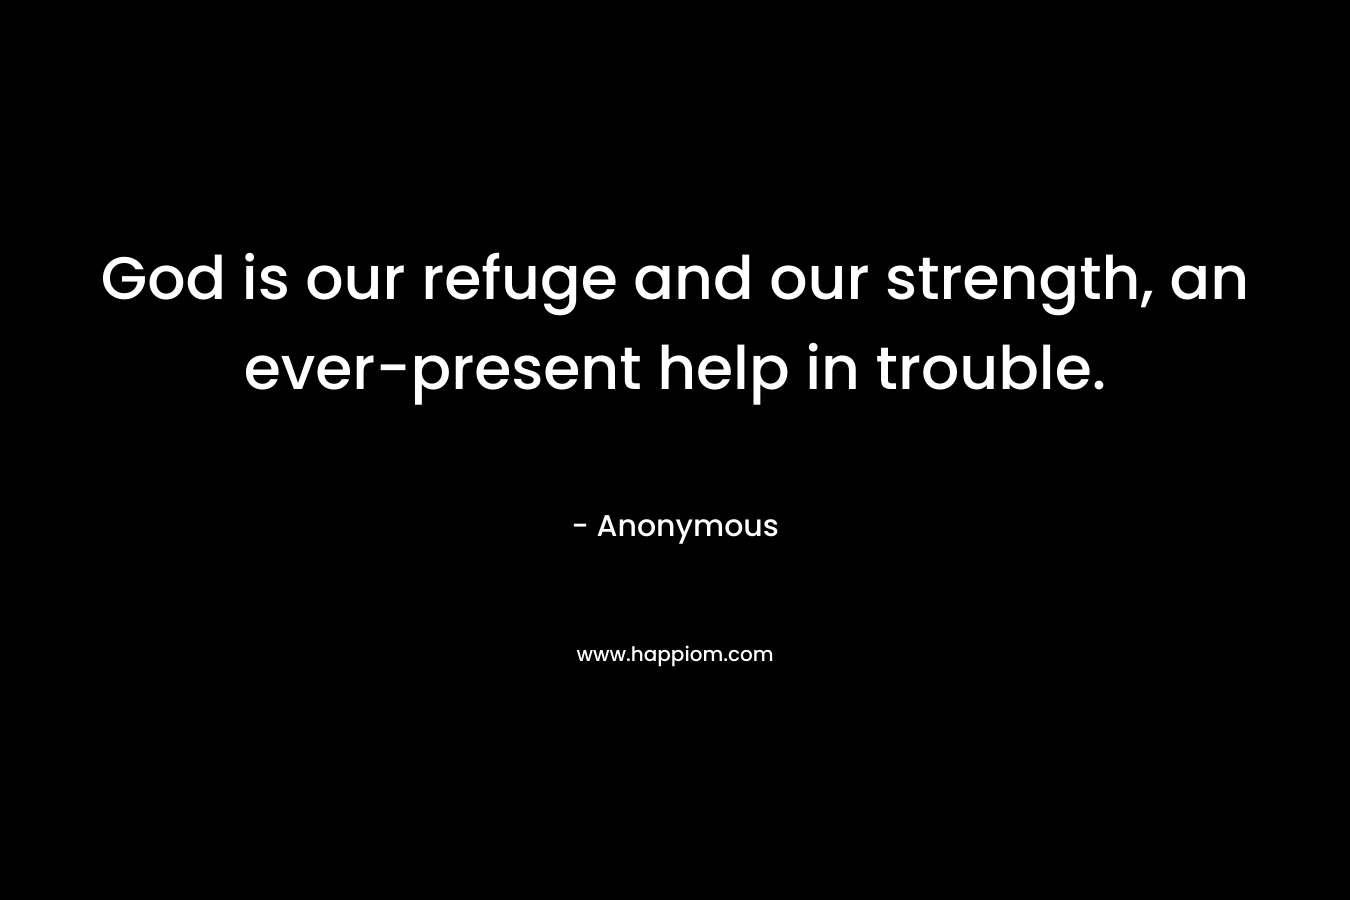 God is our refuge and our strength, an ever-present help in trouble.